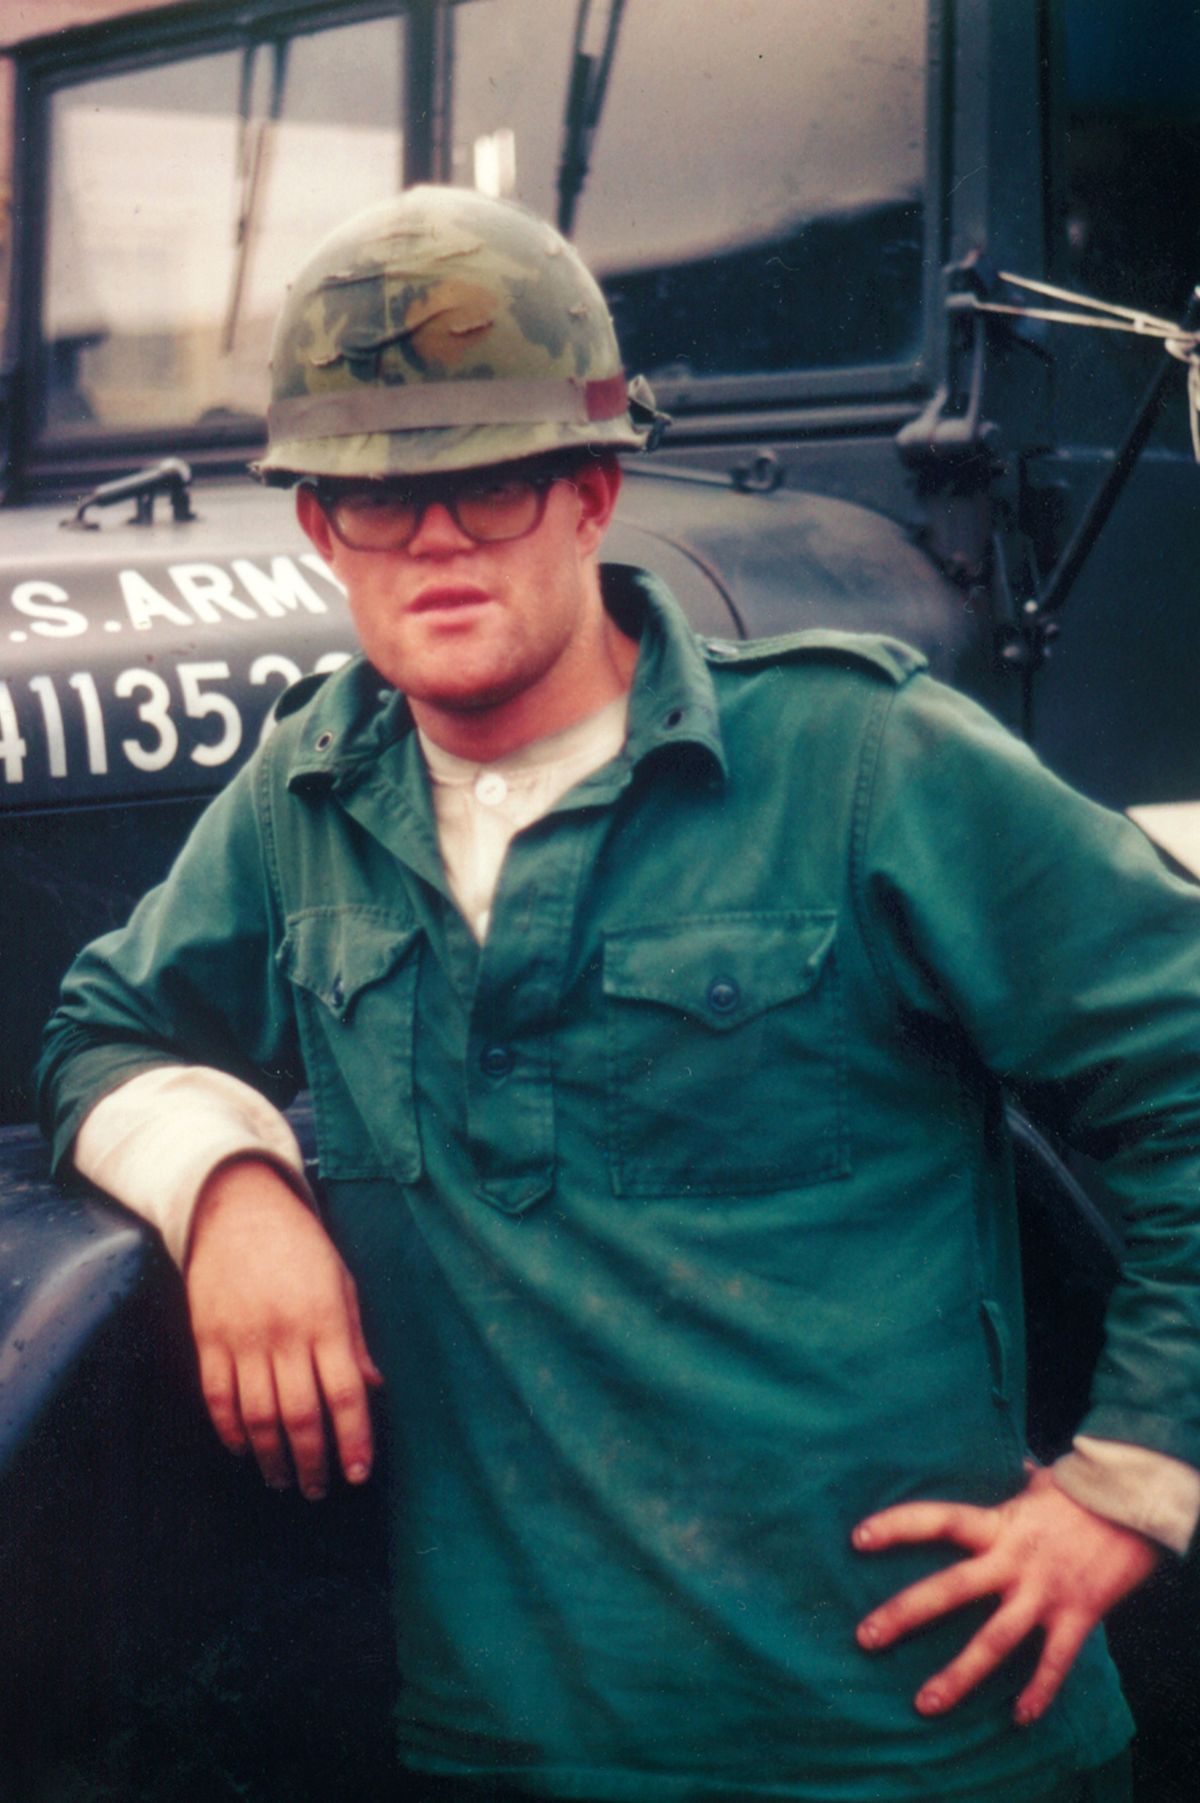 Grady Myers, who served as an infantryman in Vietnam, died in 2011.